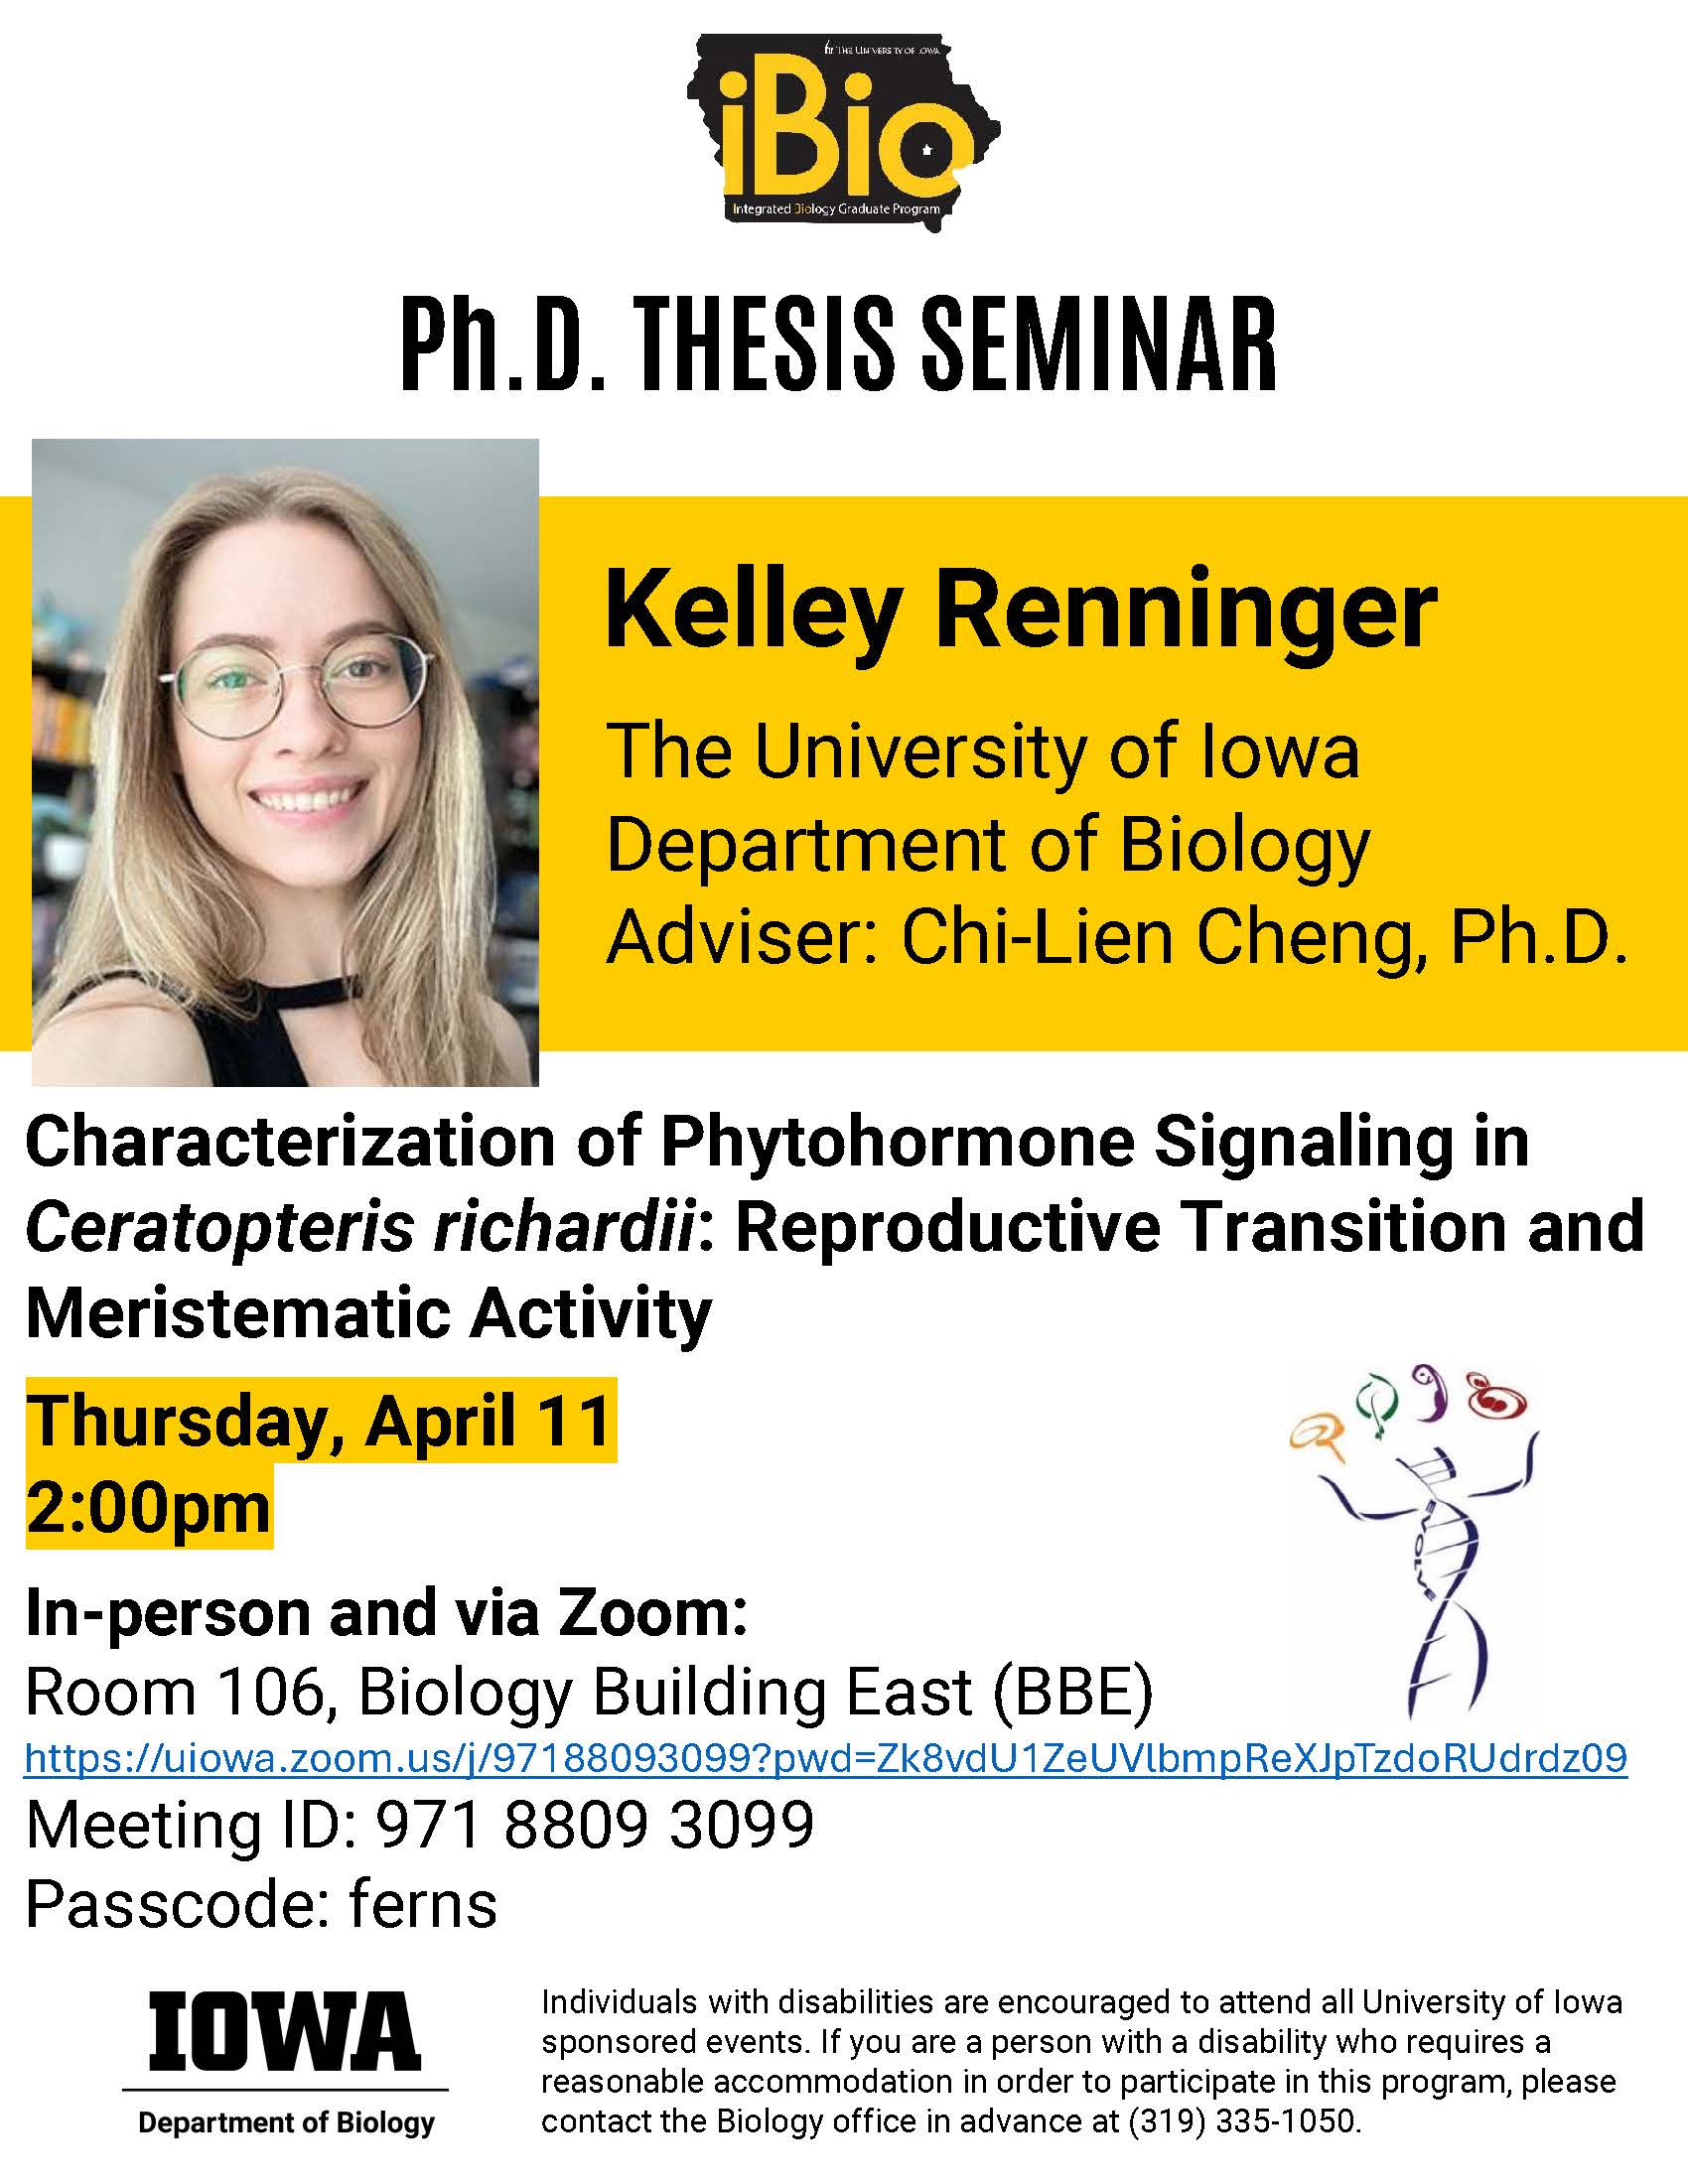 Kelley Renninger, a PhD student in the Integrated Biology Graduate Program, will be defending her thesis on Thursday, April 11. Her public seminar will be held at 2pm in Room 106, Biology Building East.